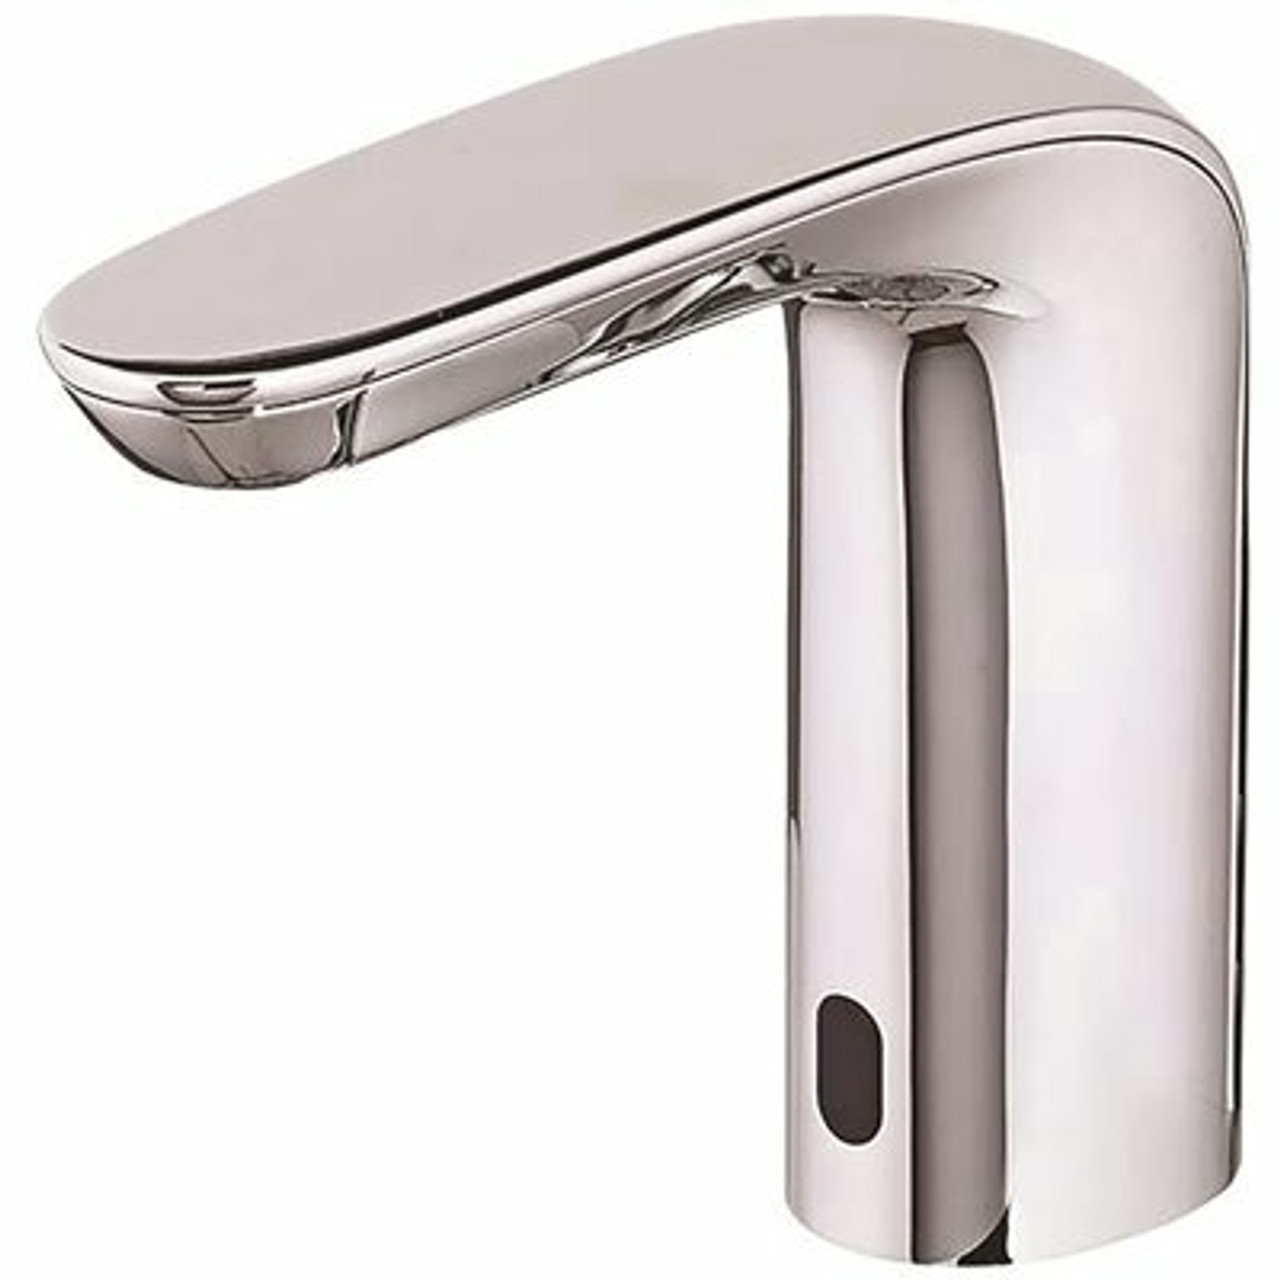 Nextgen Selectronic Ac Powered Single Hole Touchless Bathroom Faucet, Less Mixing 0.5 Gpm In Polished Chrome (4-Pack)